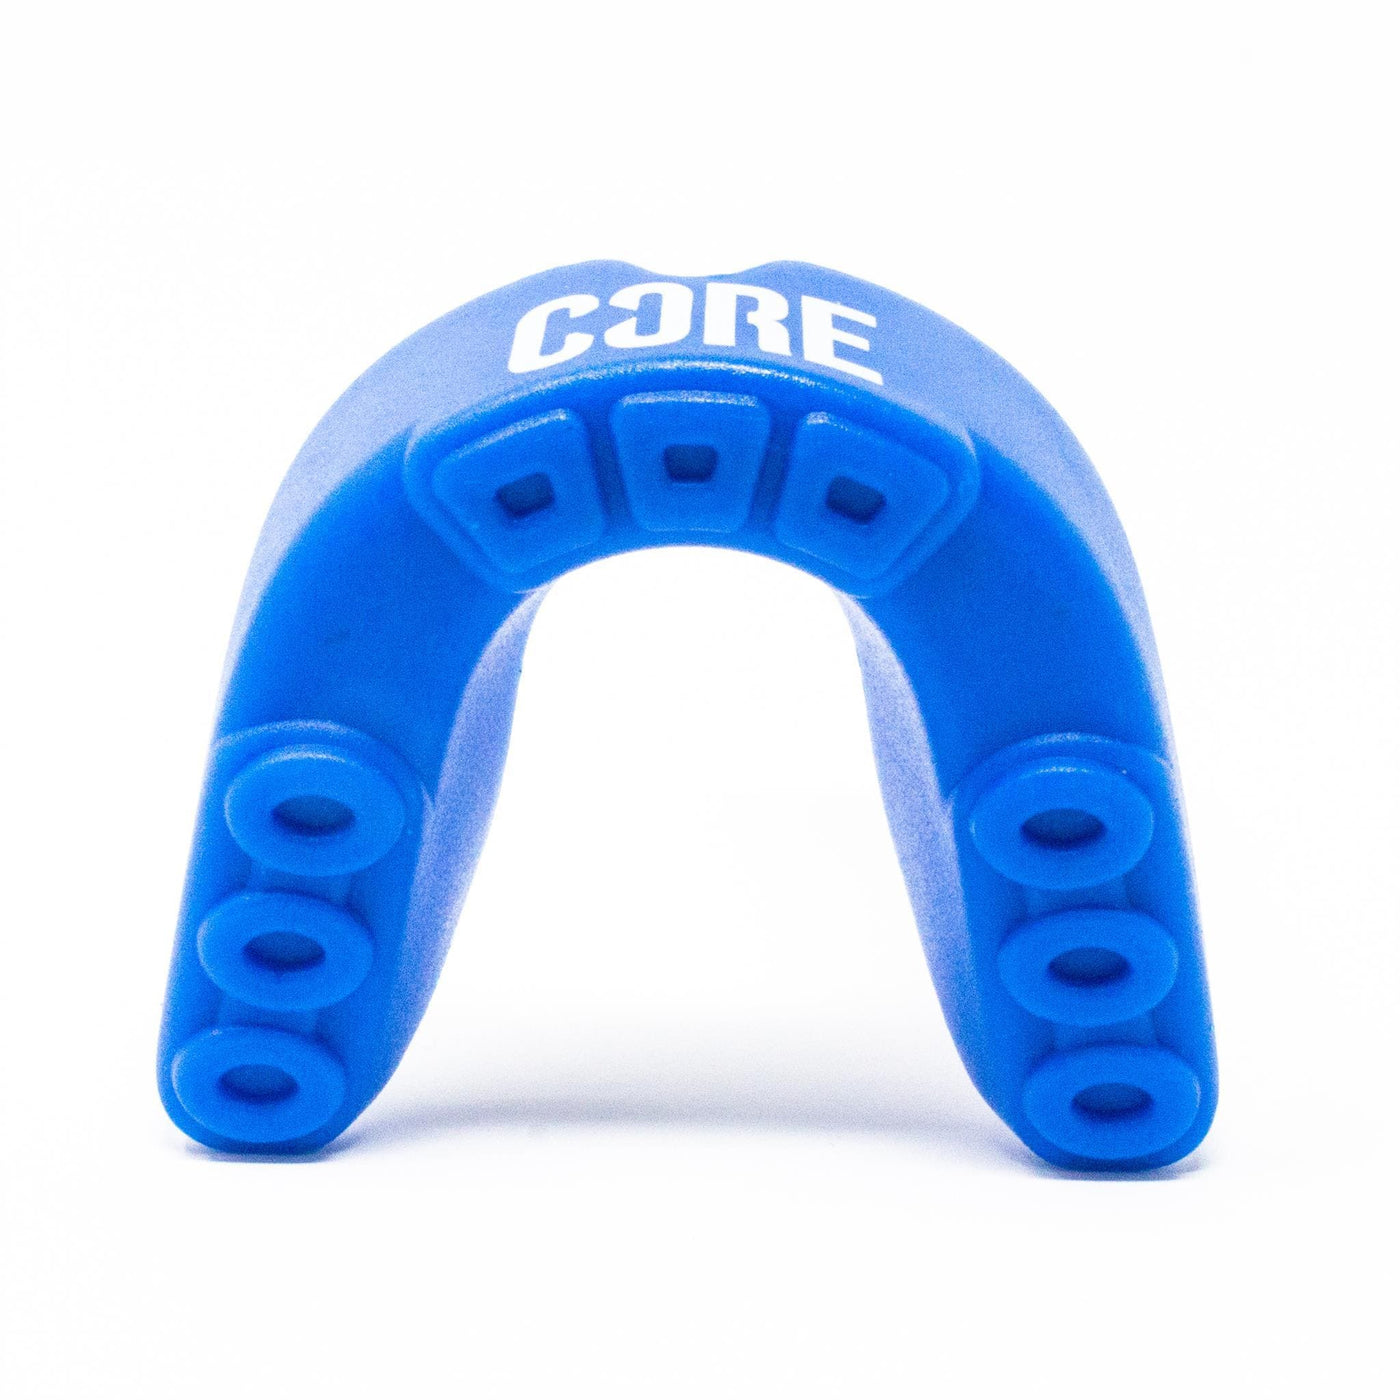 CORE Protection Sports Mouth Guard Gum Shield White I Mouthguards Bottom